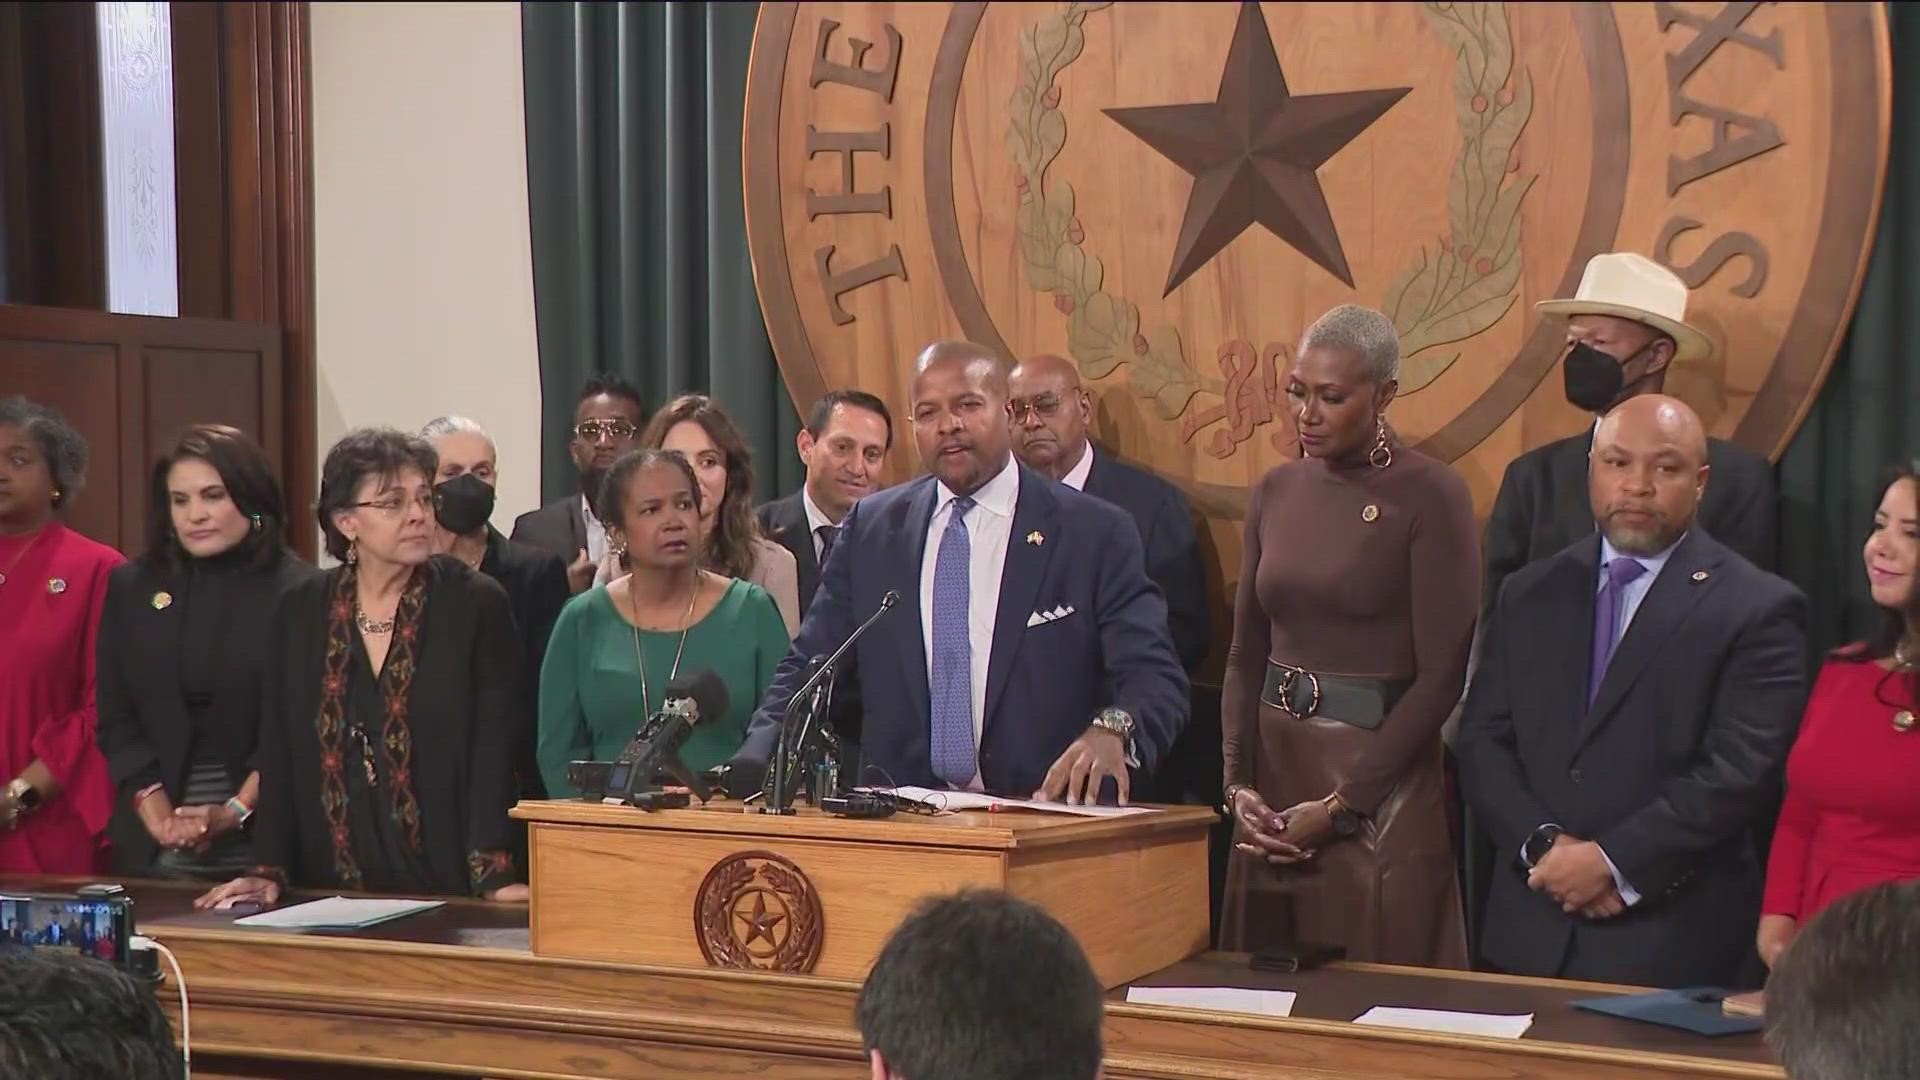 On Tuesday, lawmakers and leaders of several civil rights organizations condemned Gov. Greg Abbott's stance on diversity, equity and inclusion programs in hiring.